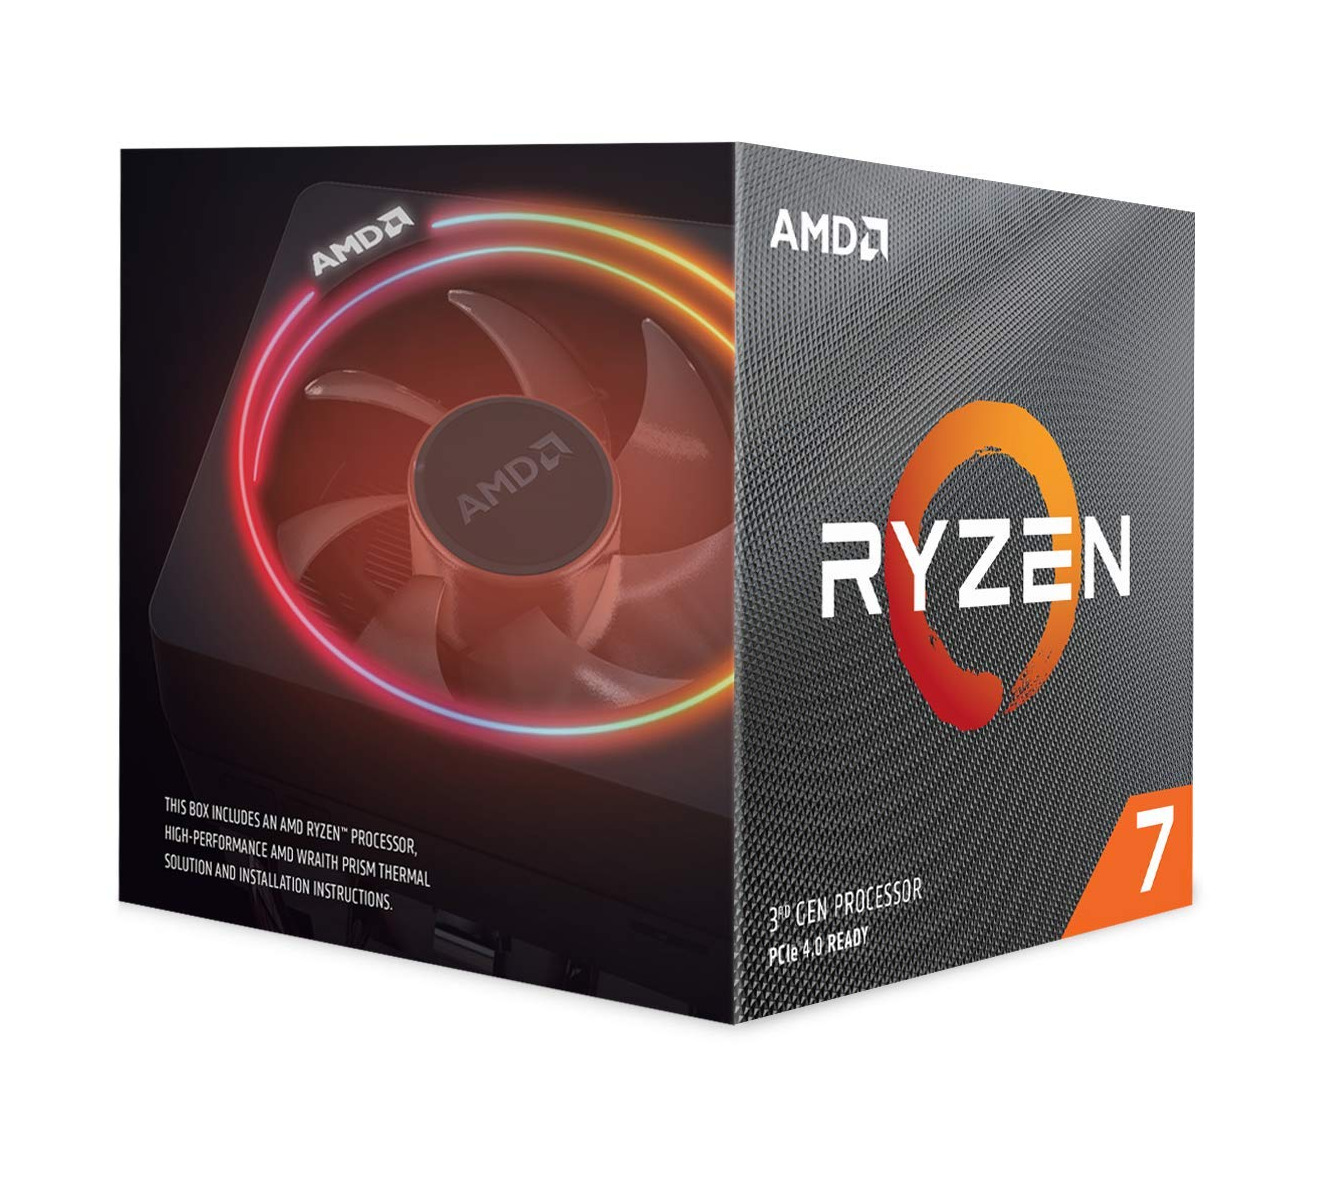 NEW AMD Ryzen 7 3700X 3.6Ghz 8-Core AM4 Boxed CPU w/ Wraith Prism Cooler